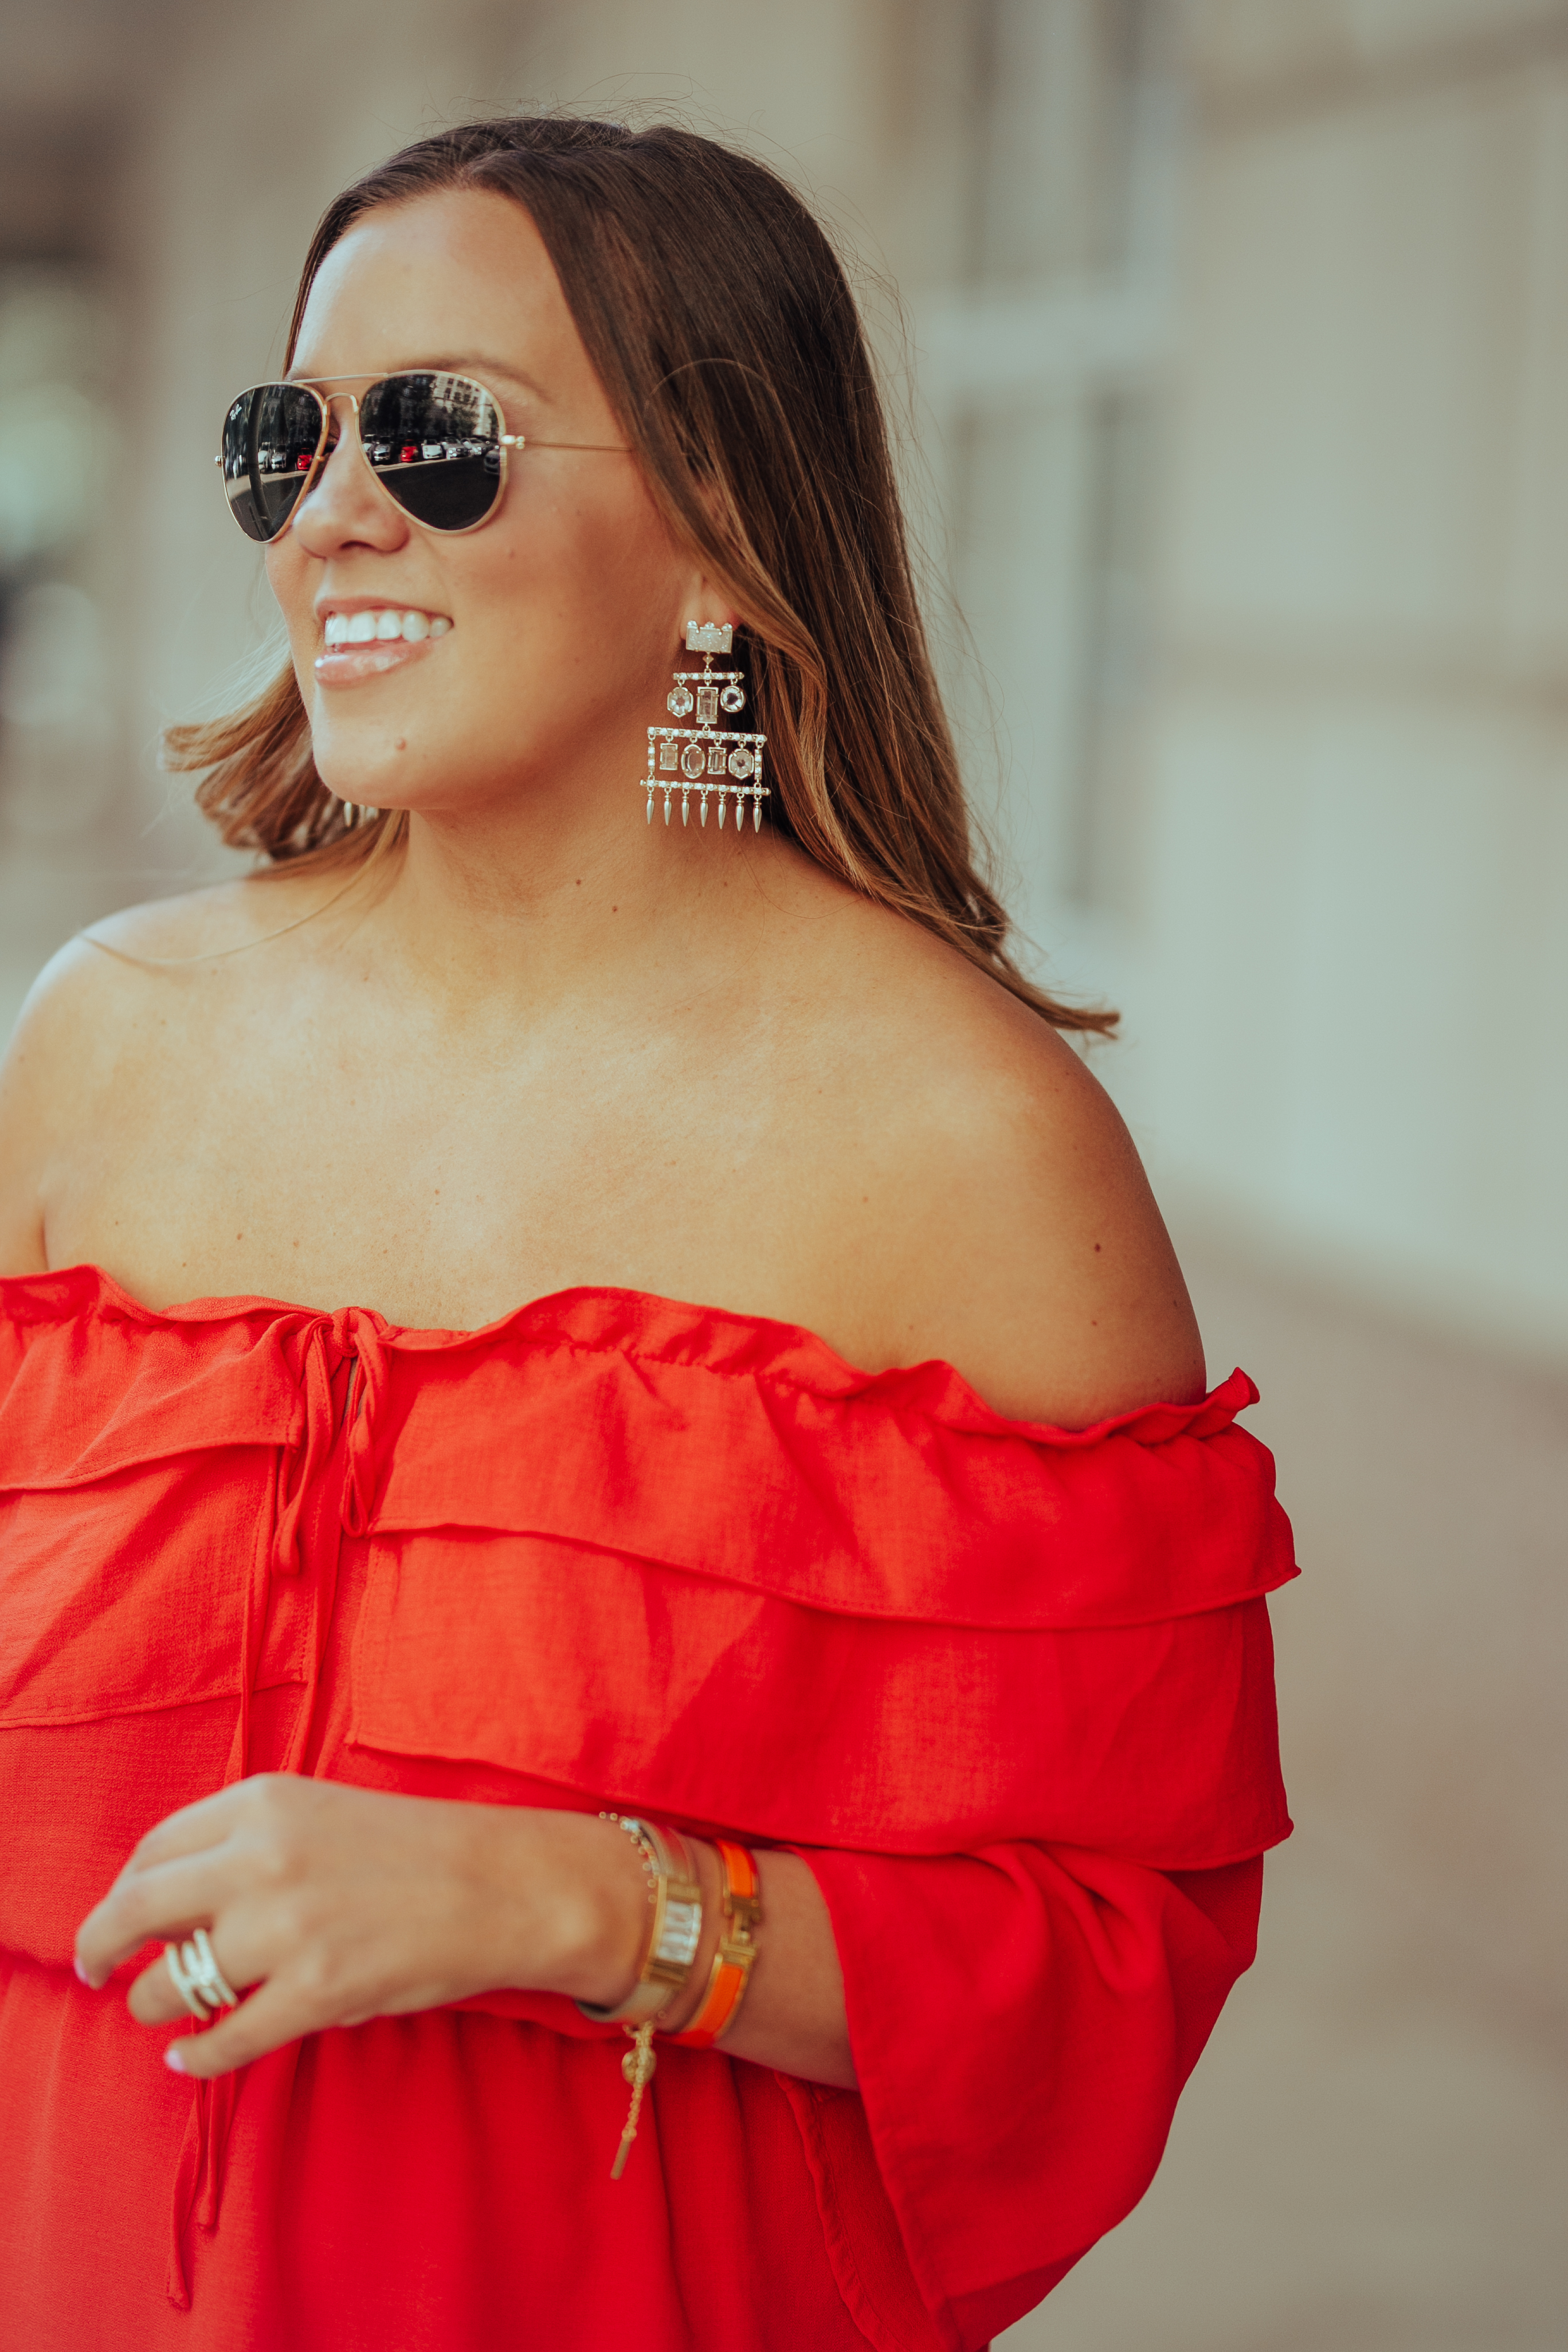 Ashley Zeal from Two Peas in a Prada shares a bright orange off the shoulder dress. She is wearing Rebecca Minkoff heels, and an Alexander Wang bag. 